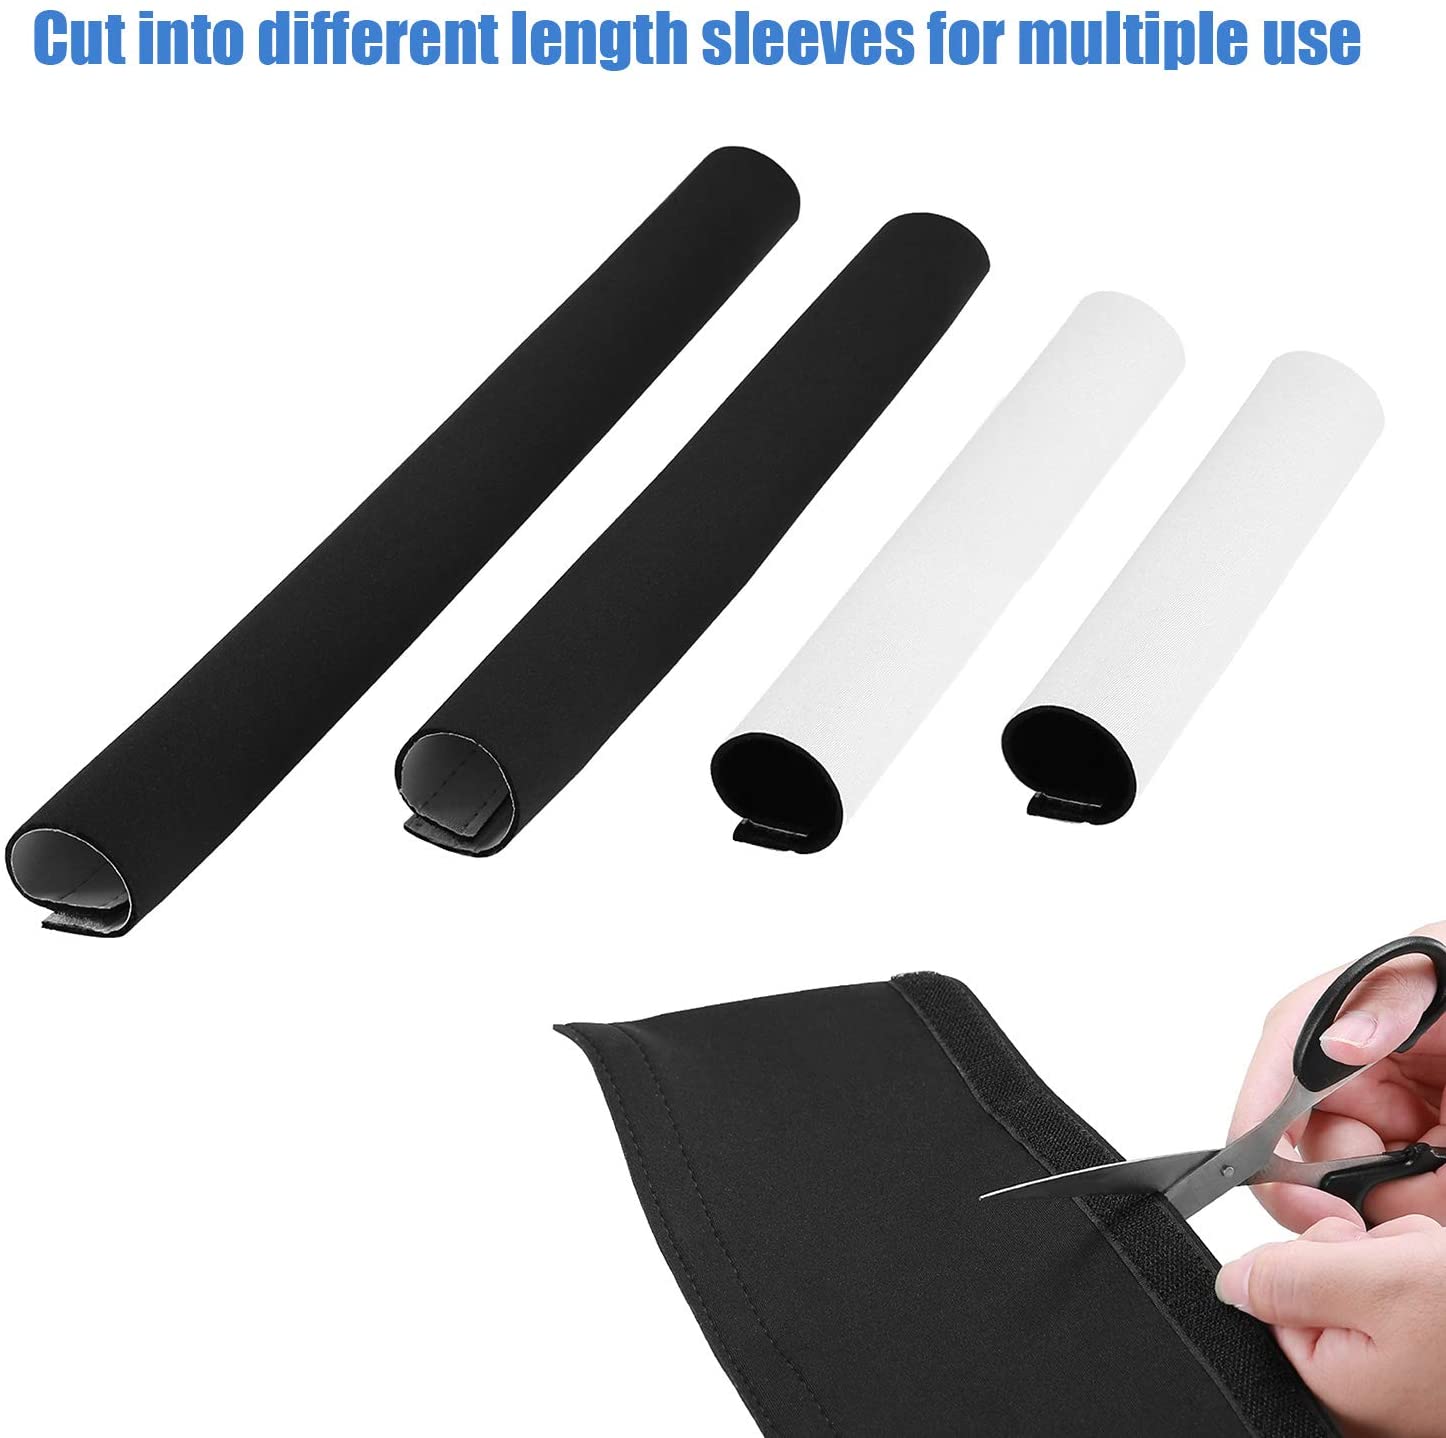 Reversible Black & White Cable Management Sleeves Neoprene Cable